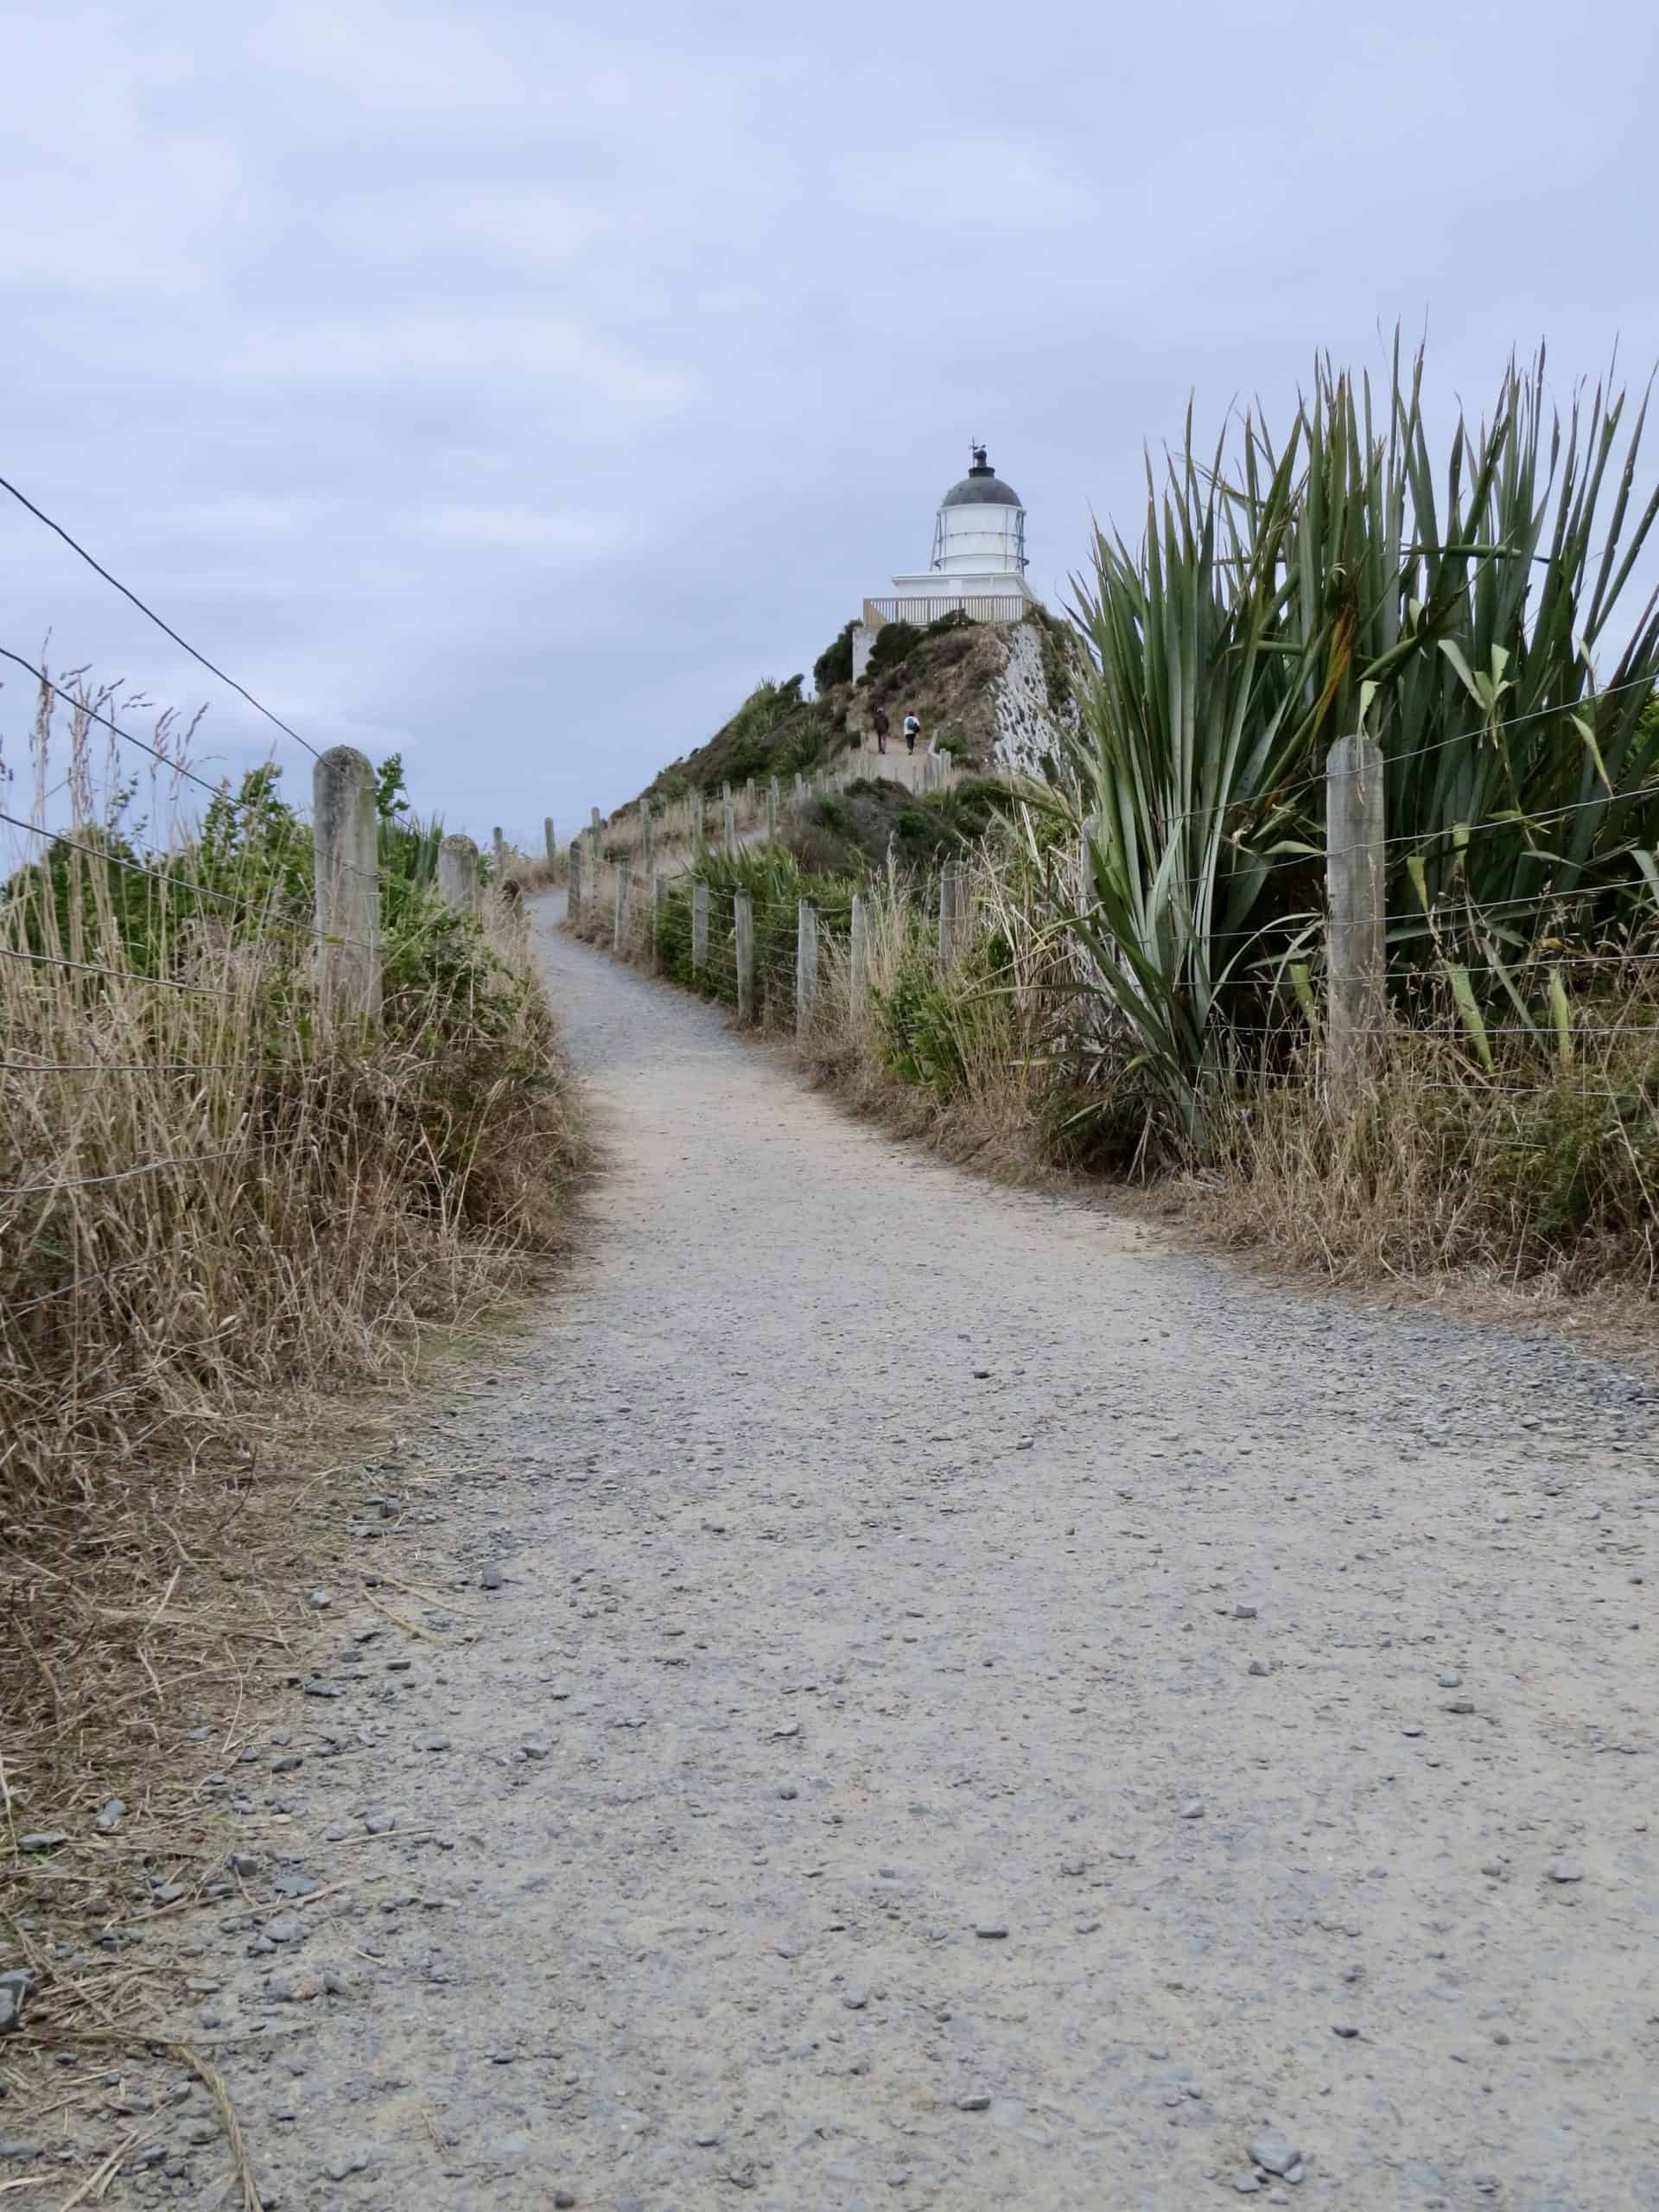 Nugget Point lighthouse is a picturesque attraction to visit on your Catlins road trip